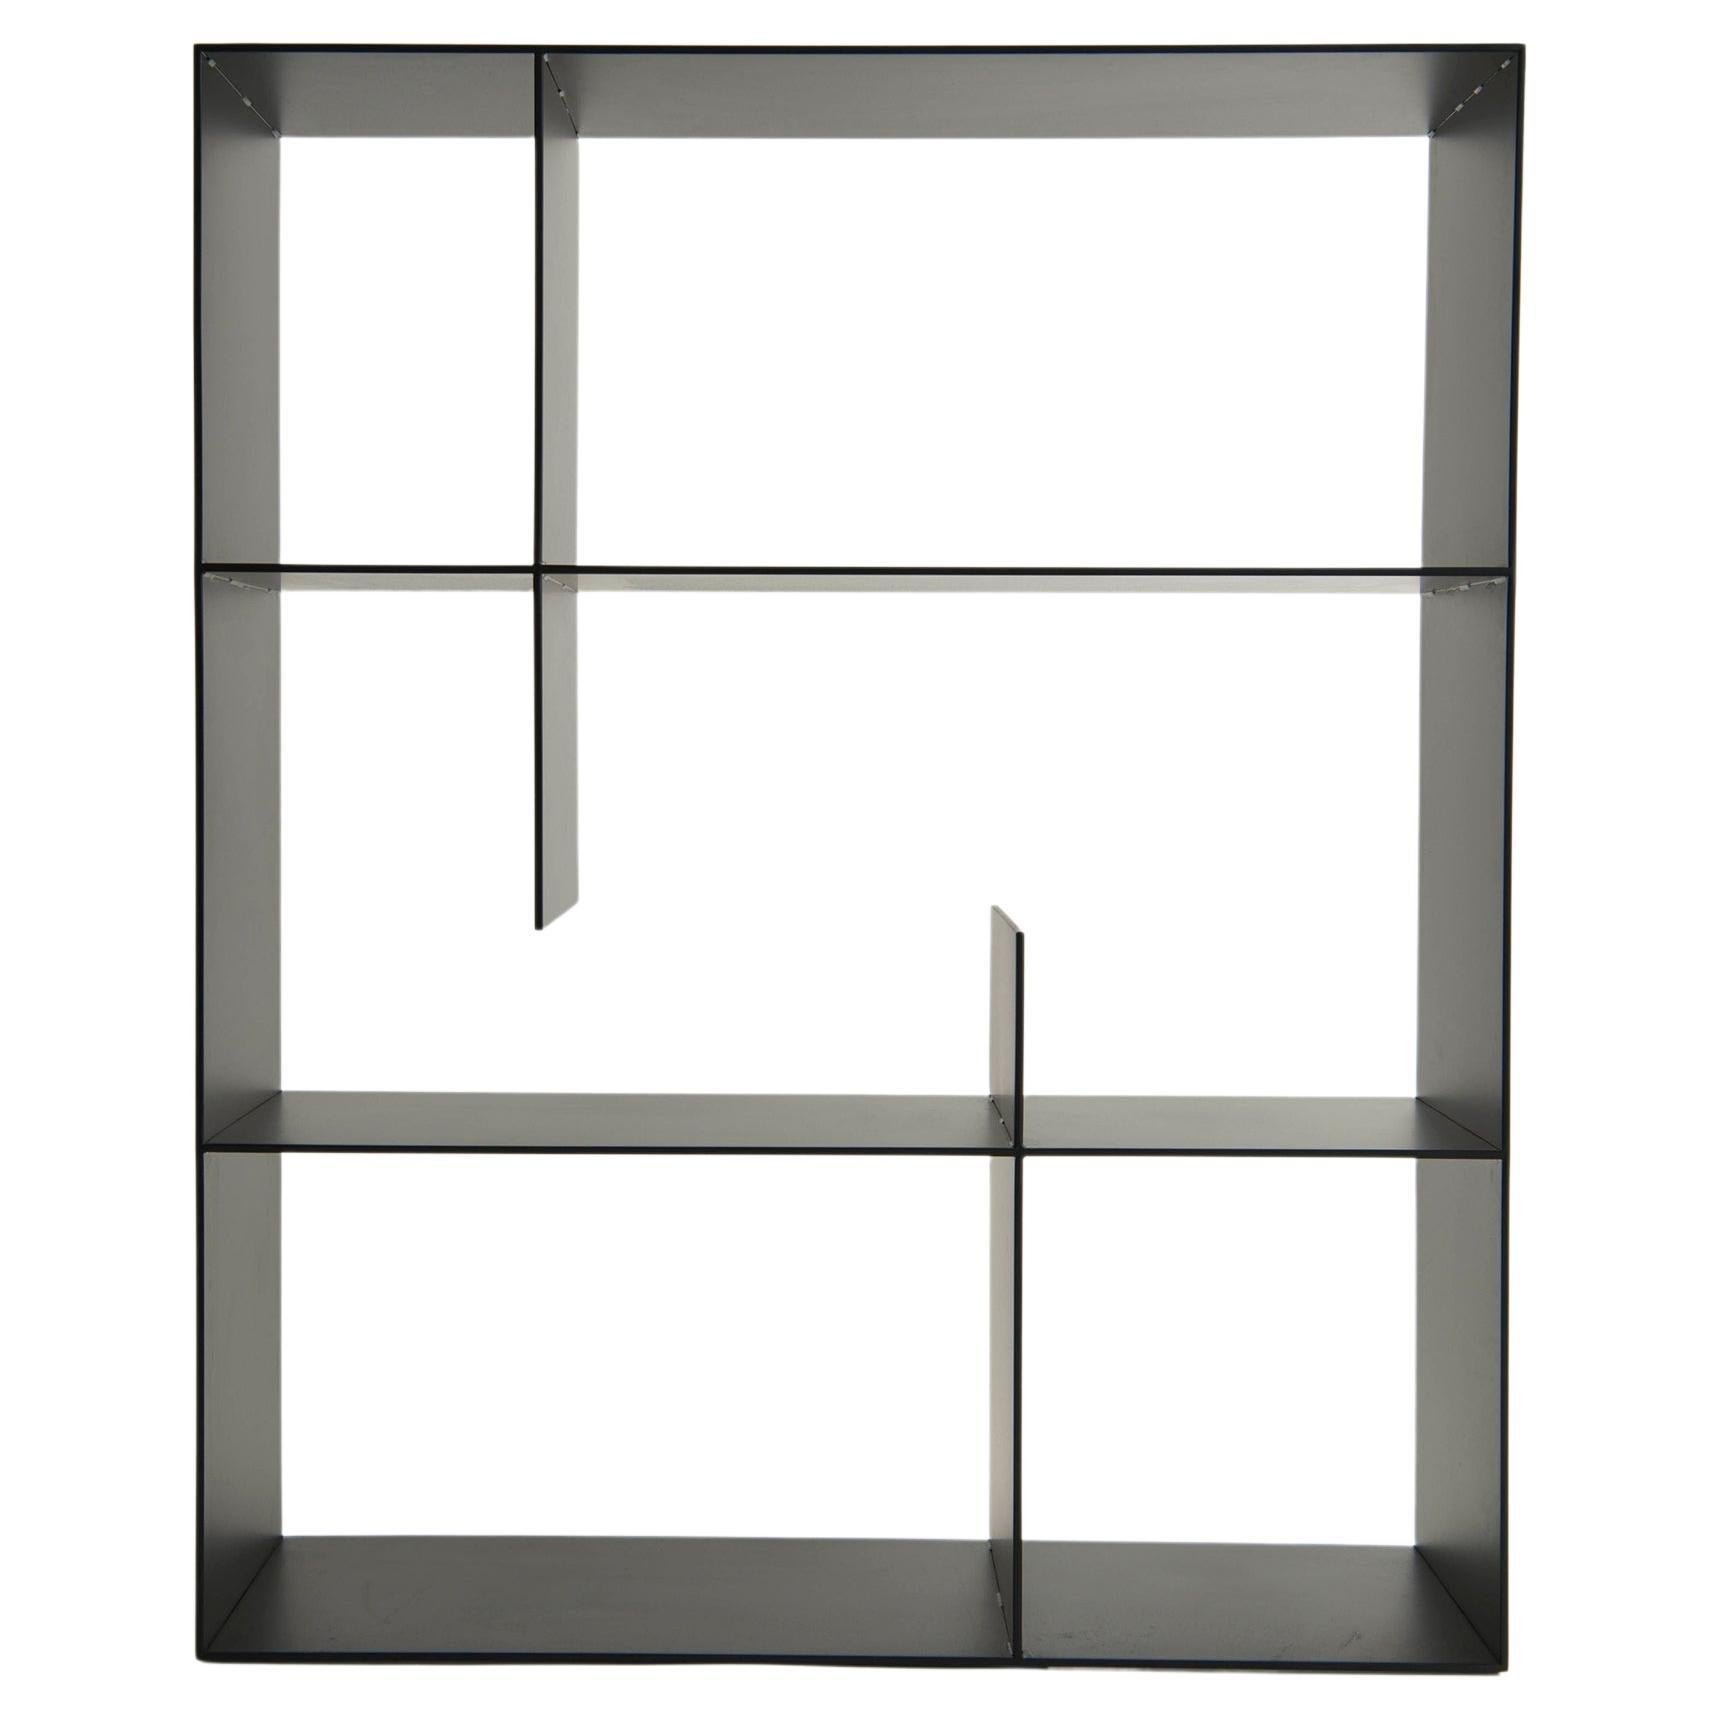 Division Shelving by Phase Design